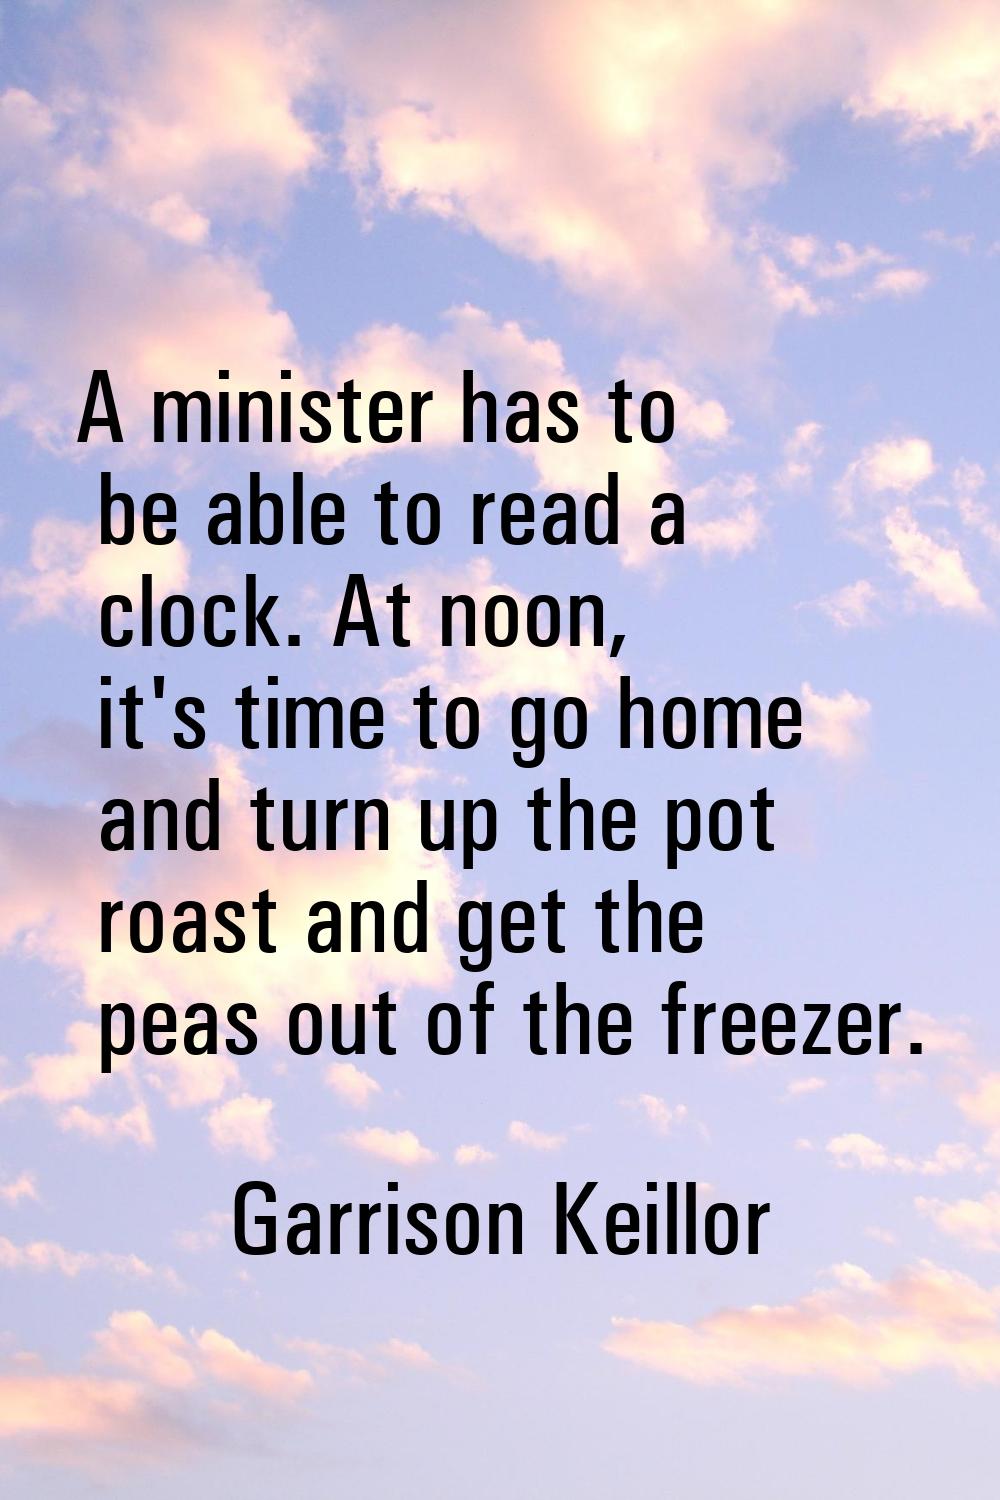 A minister has to be able to read a clock. At noon, it's time to go home and turn up the pot roast 